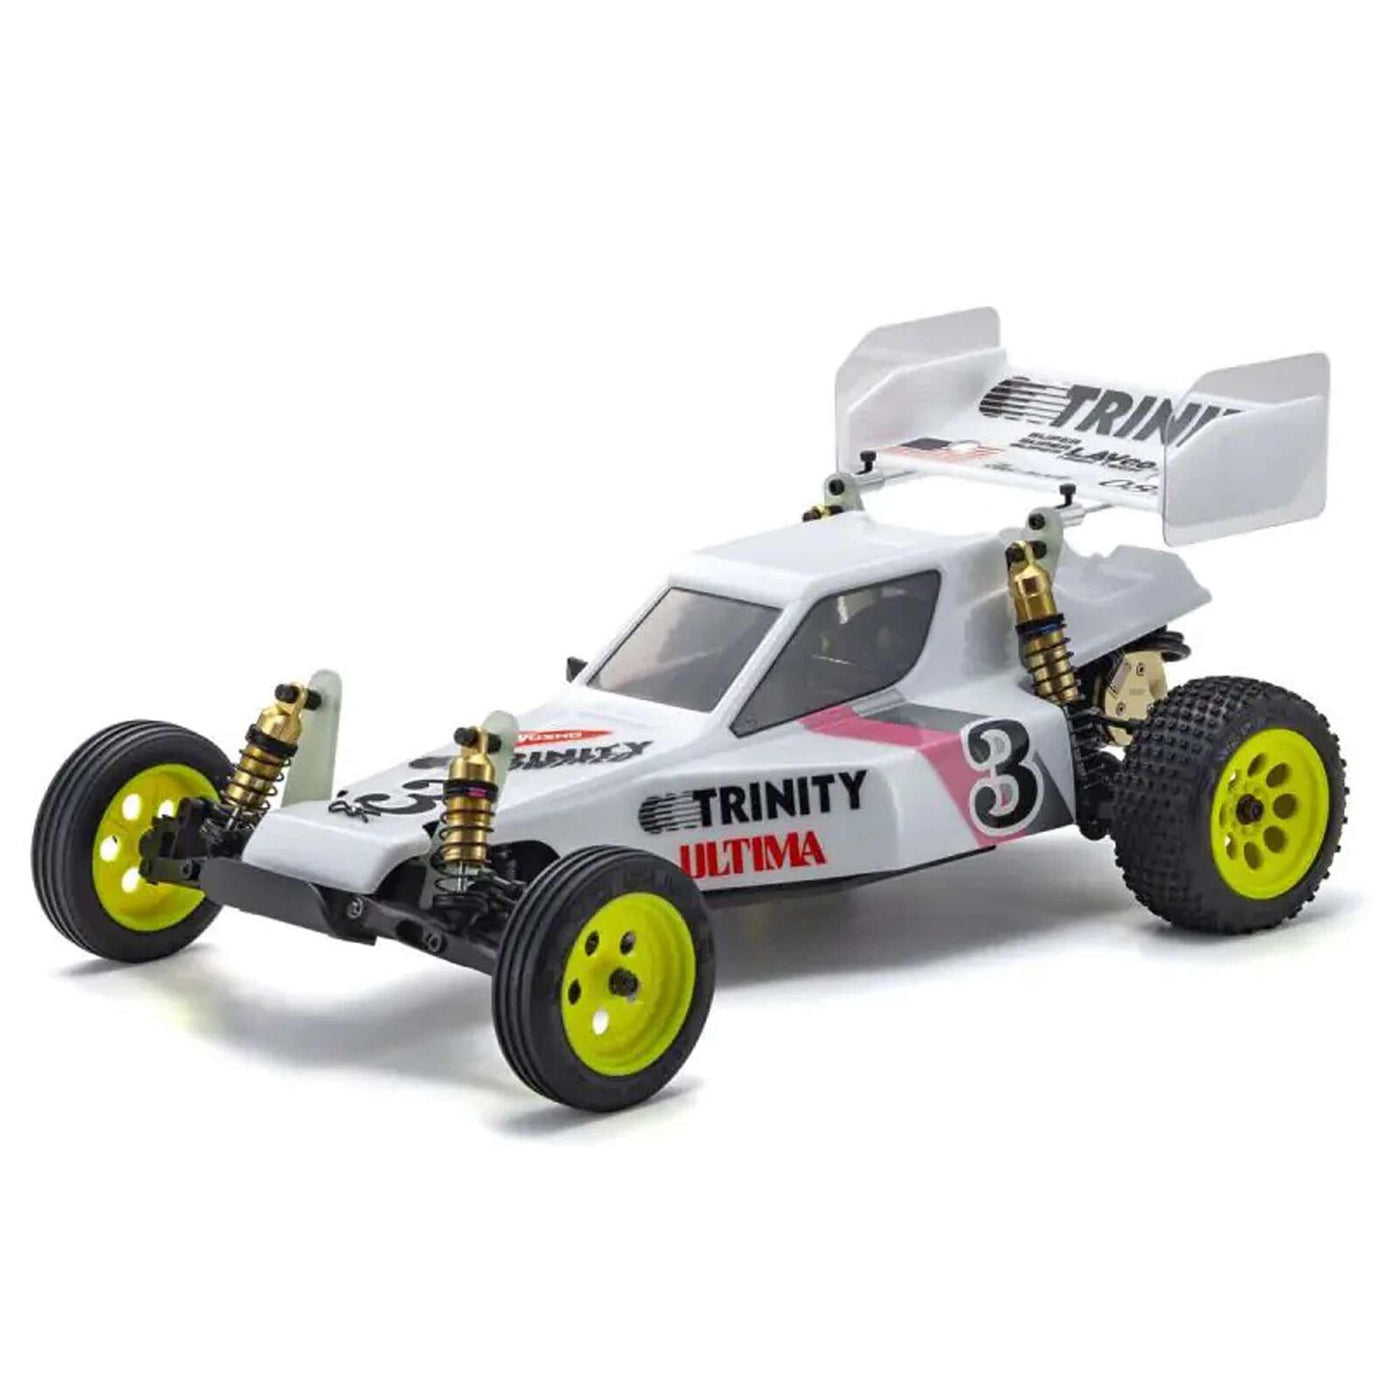 1/10 '87 JJ Ultima 60th Anniversary Electric 2WD Off-Road Buggy Kit Kyosho KYO30642